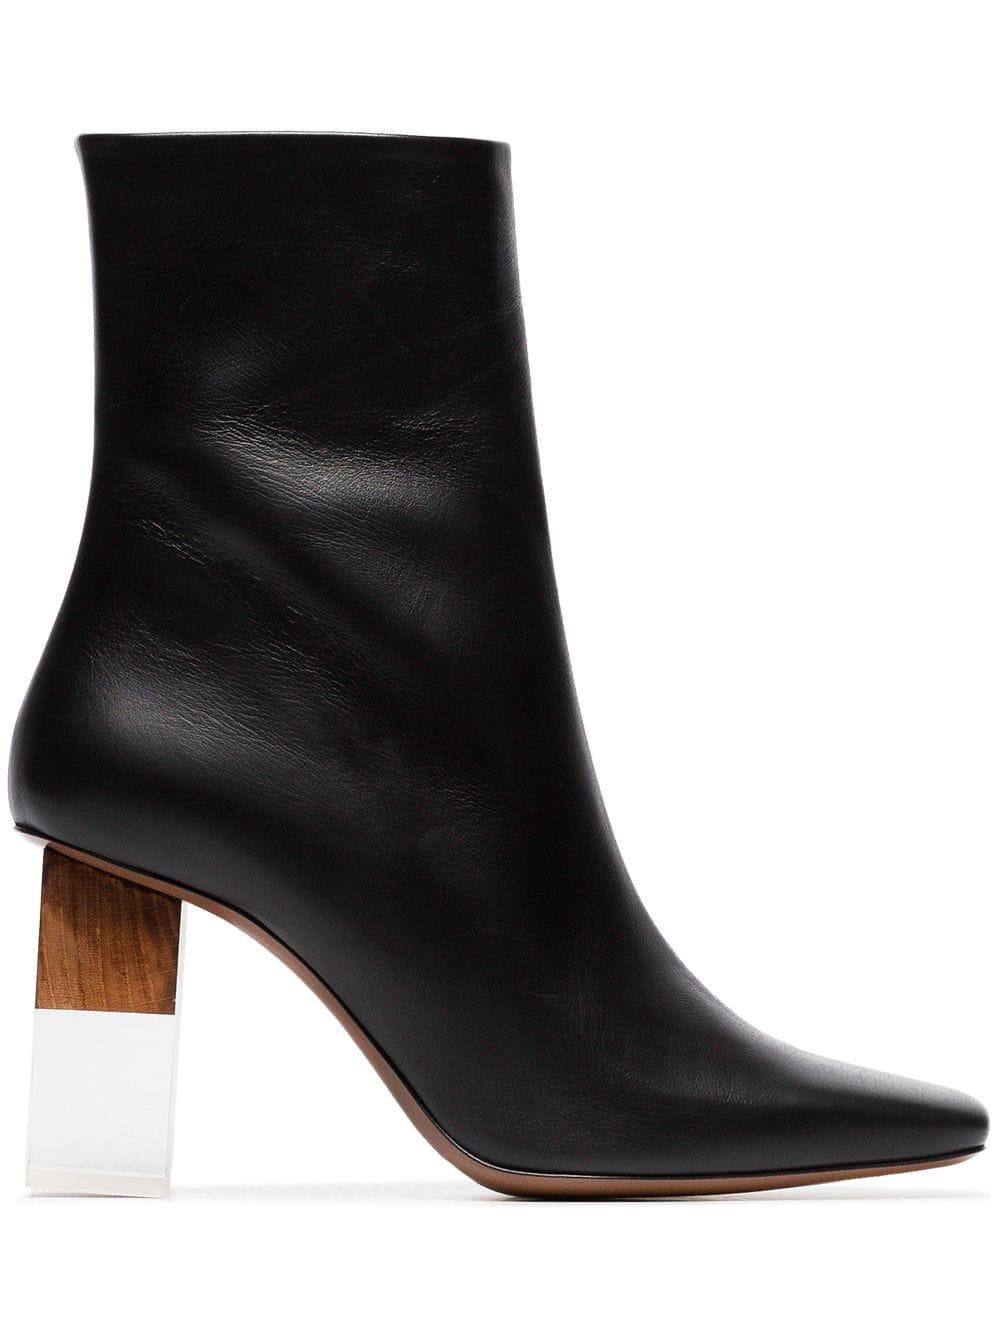 Neous Hea 80 Leather Ankle Boots in Black - Lyst